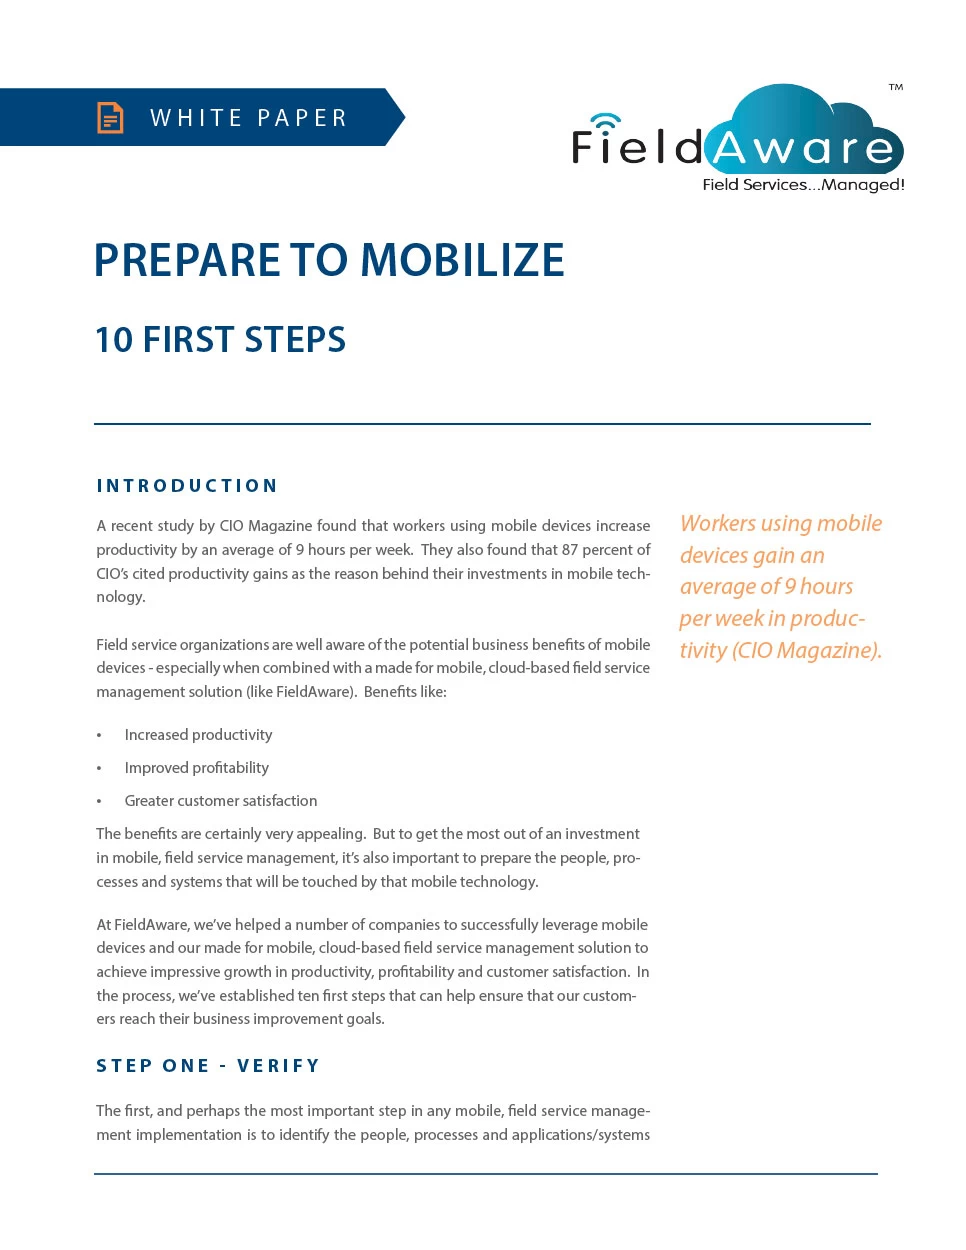 Prepare To Mobilize - 10 First Steps White Paper